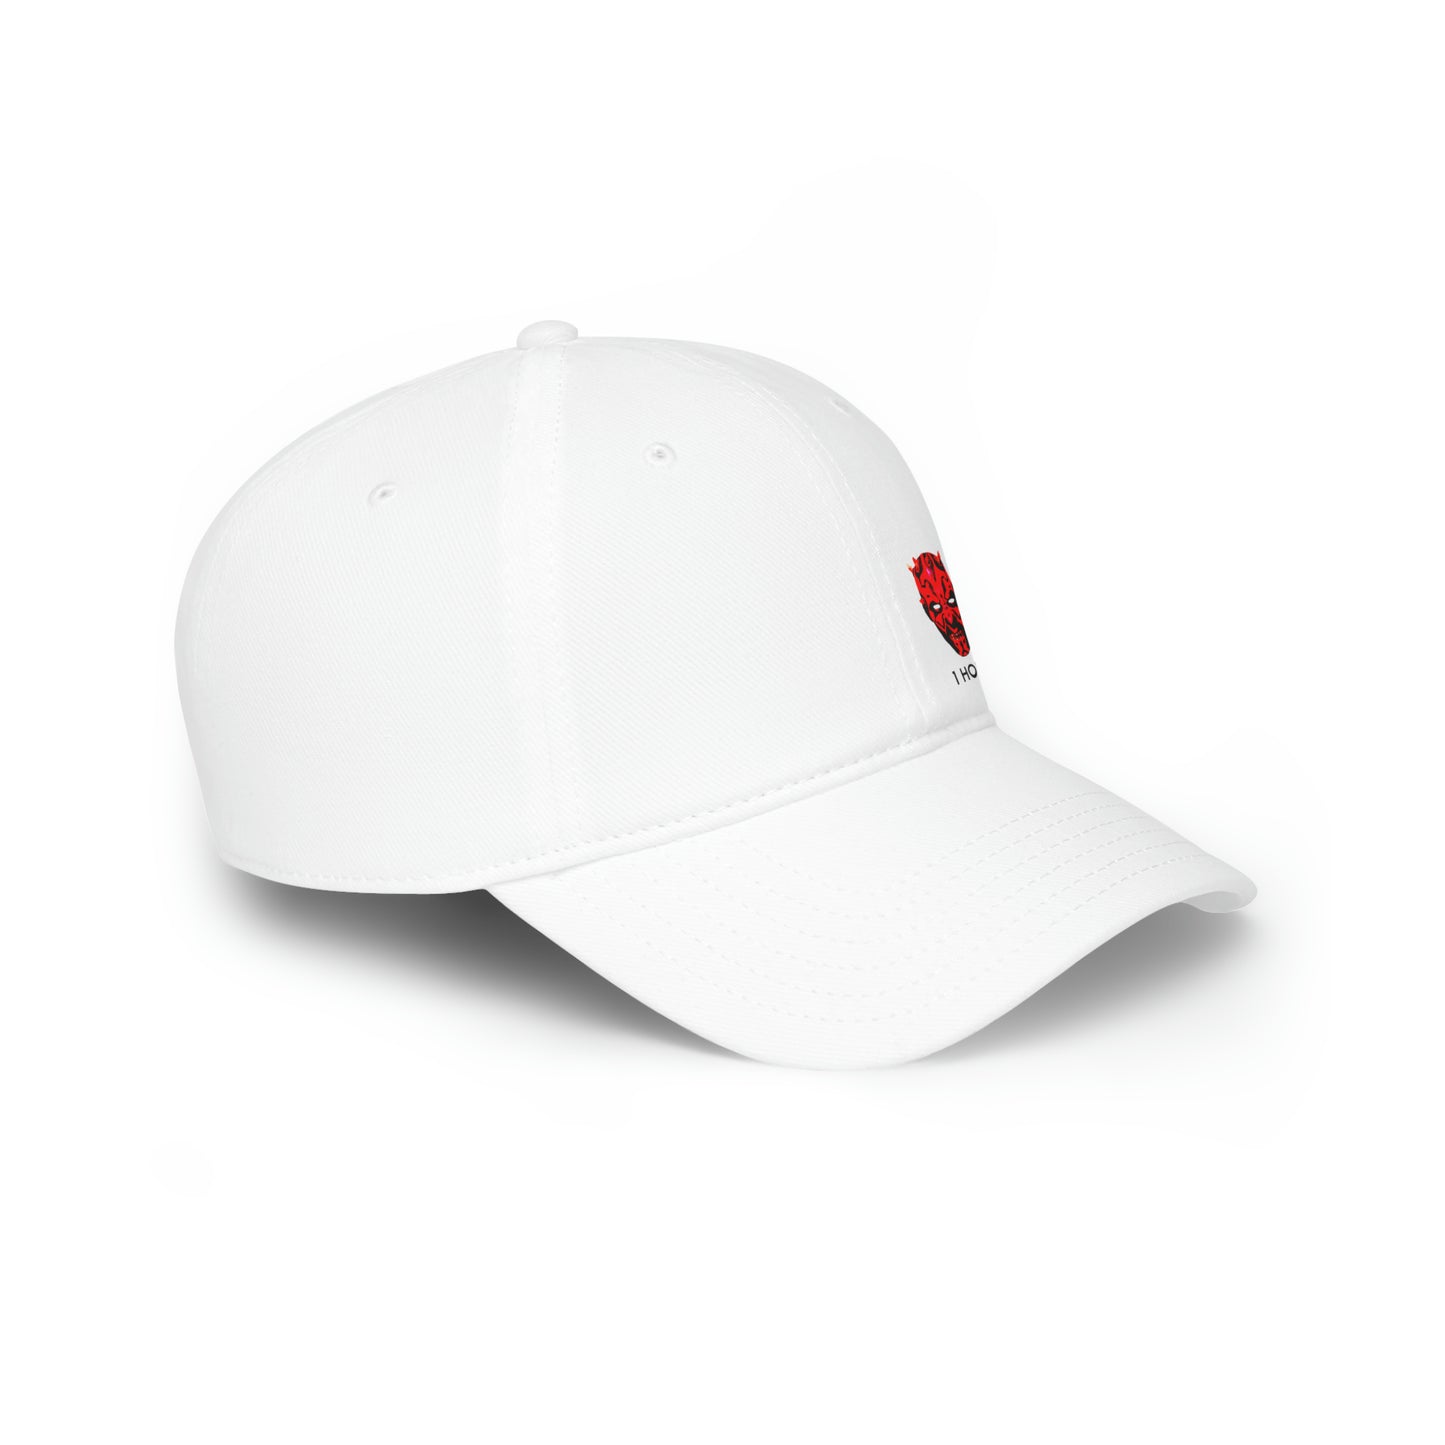 DBBH Hat #2 (White Color)